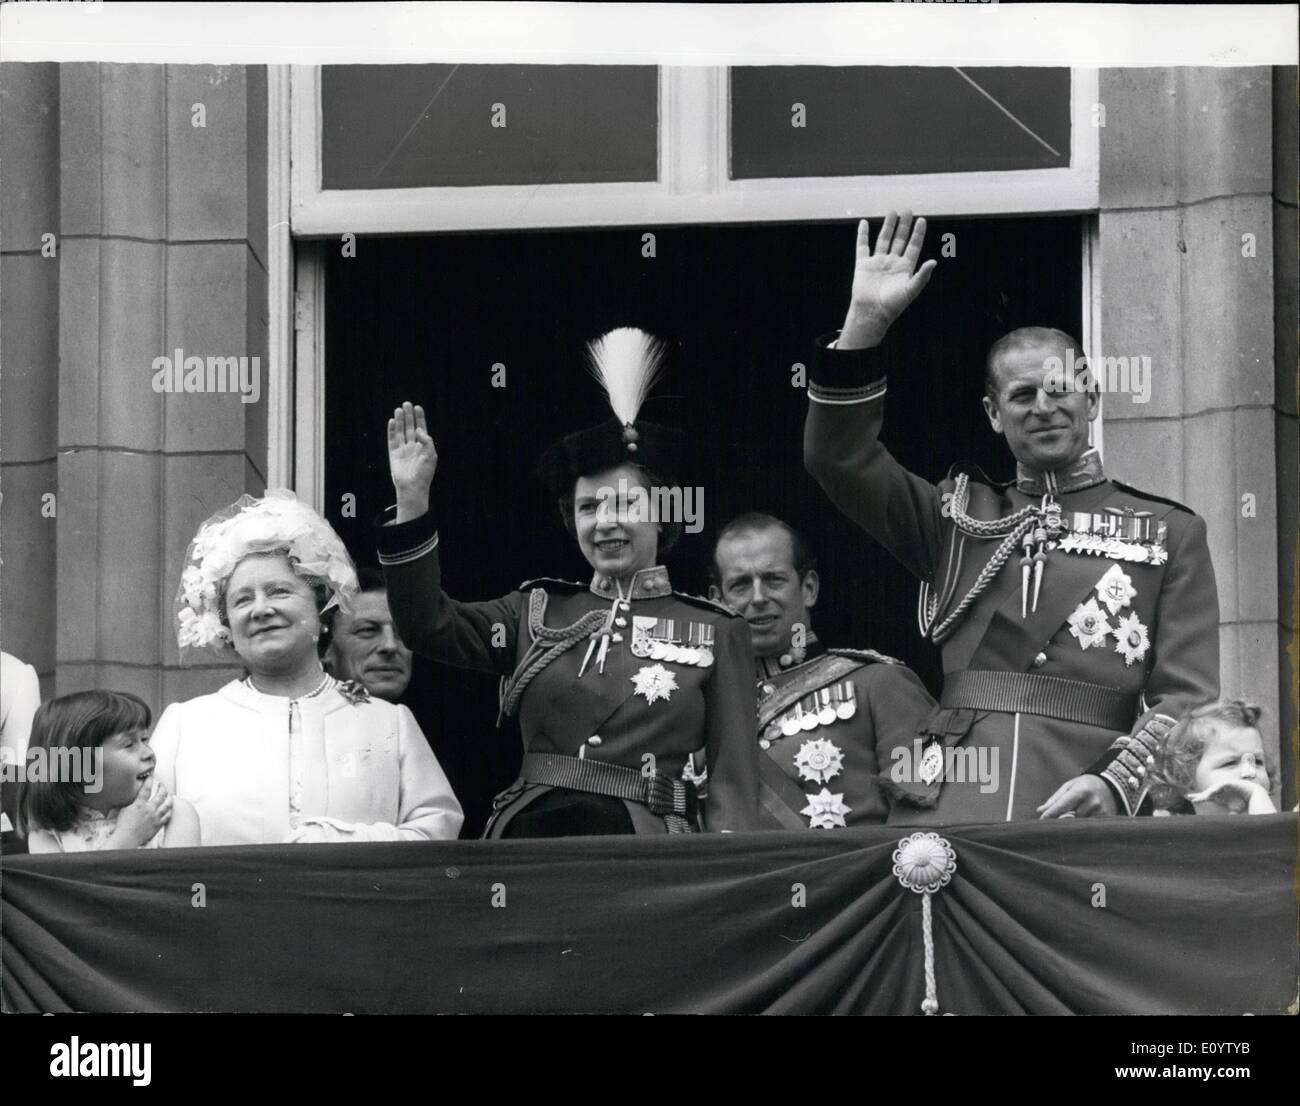 Jun. 06, 1971 - The Queen takes the salute at the Trooping the colour ceremony: To mark her official birthday the Queen today took the salute at the Trooping the Colour ceremony, trooped by the 2nd Battalion Grenadier Guards, on Horse Guards Parade. Photo shows A wave from the balcony of Buckingham Palace from the Queen and Prince Philip, accompanied by (L to R.) Lady Sarah Armstrong Jones, daughter of Princess Margaret, Queen Elizabeth the Queen Mother, Mr. Angus Ogilvy, husband of Princess Alexandra, the Duke of Kent, during today's ceremony. Stock Photo